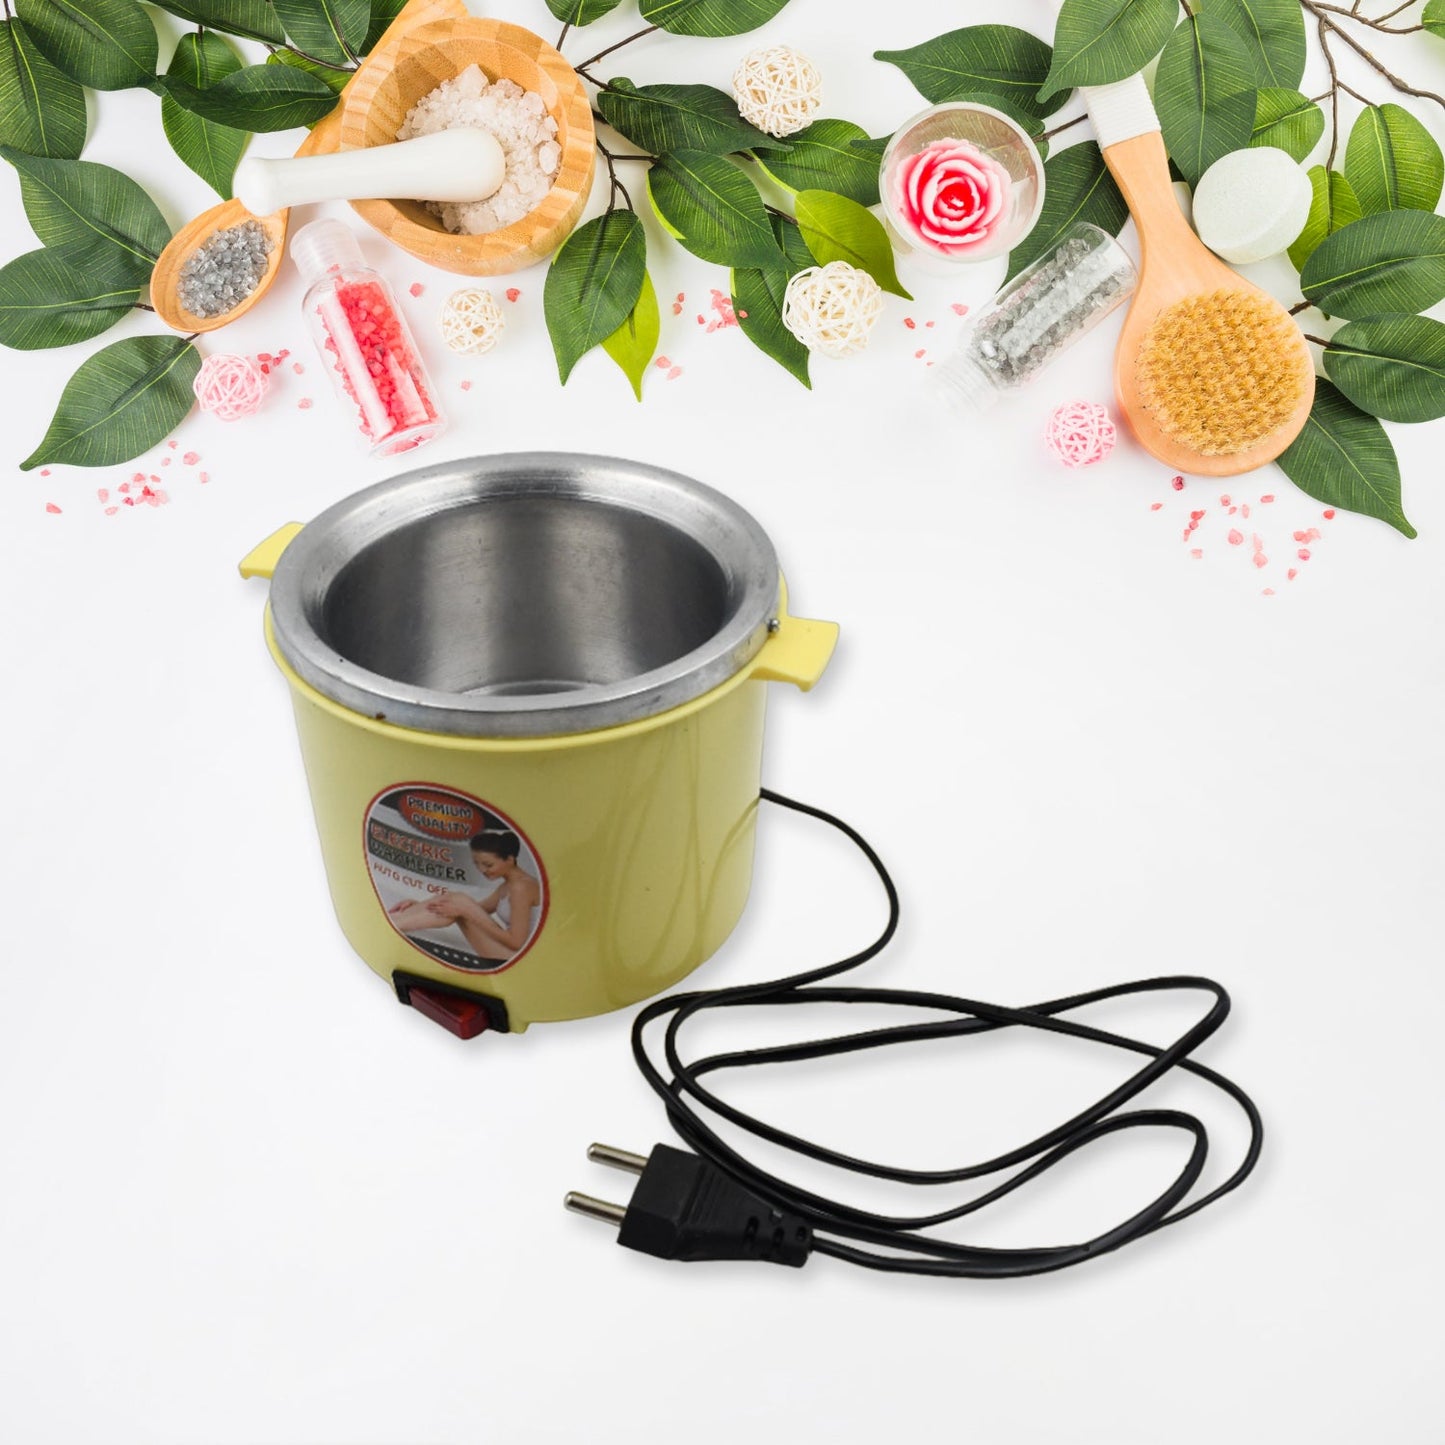 Wax Heating Machine, Reliable and Convenient to Use Wax Warmer 240W Wax Machine EU Plug 220V Durable and Practical for Parlour, Salon for Home